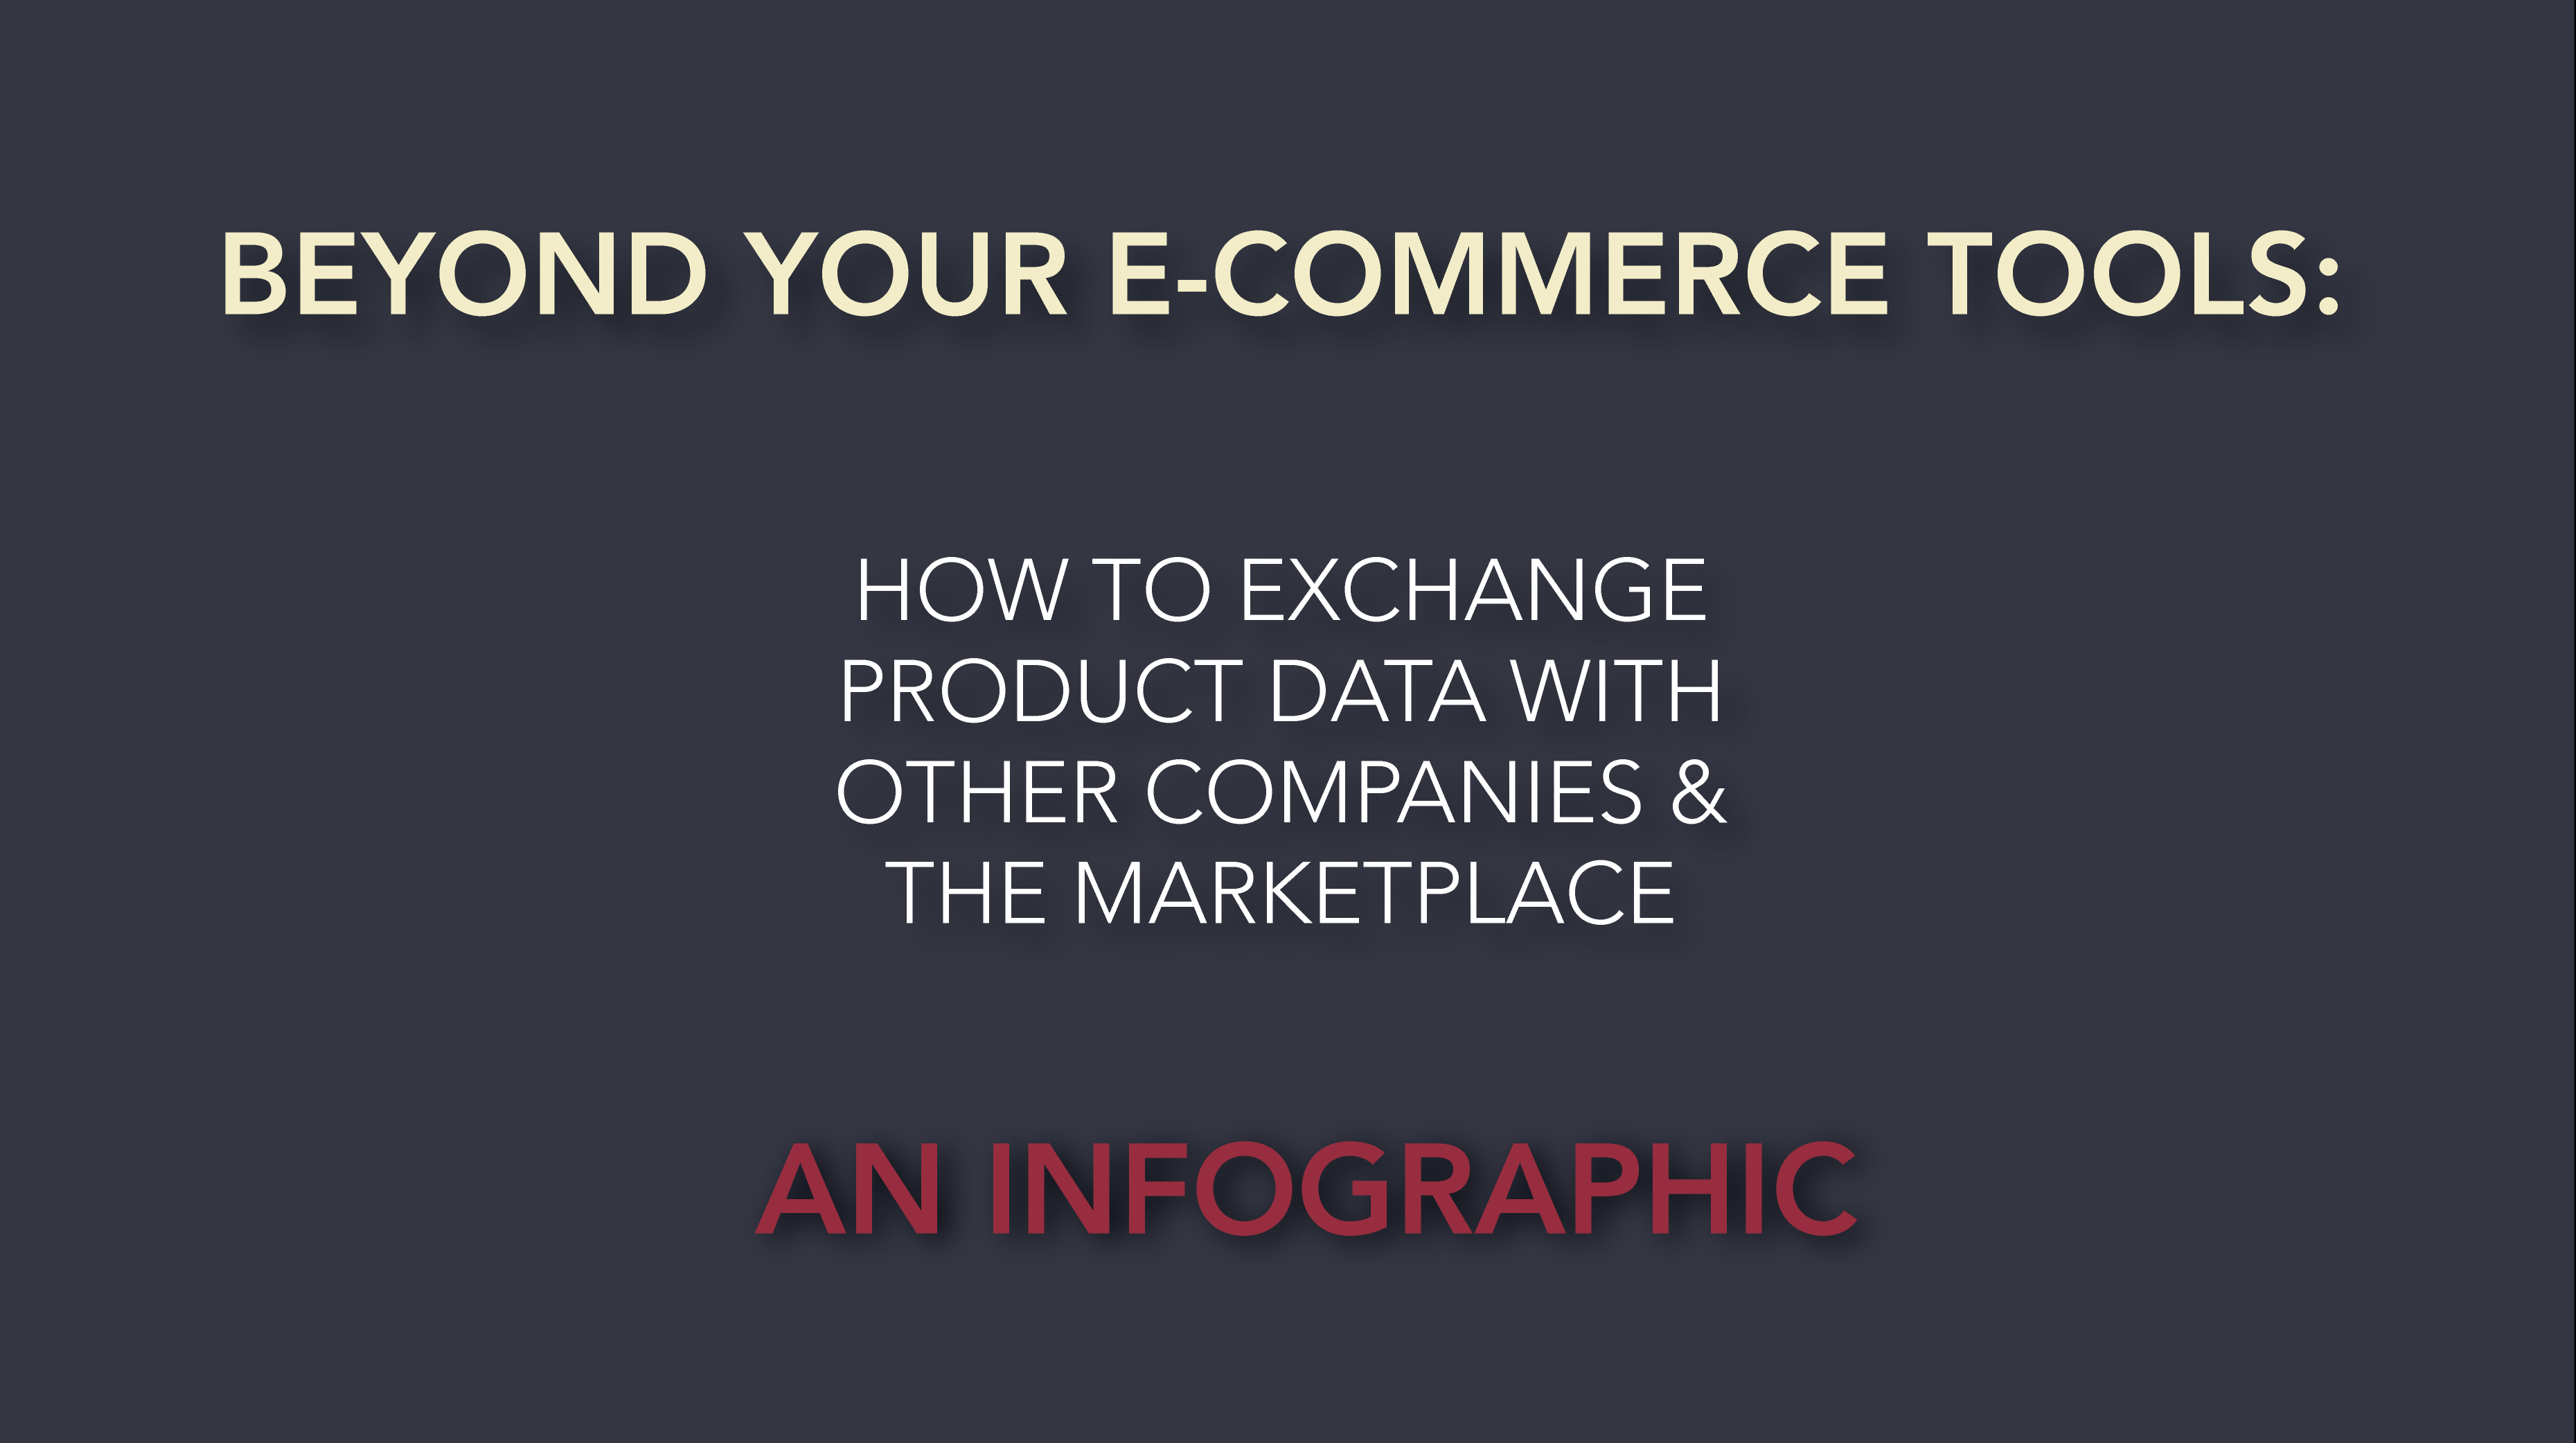 Infographic: How to Exchange Product Data with Other Companies and the Marketplace